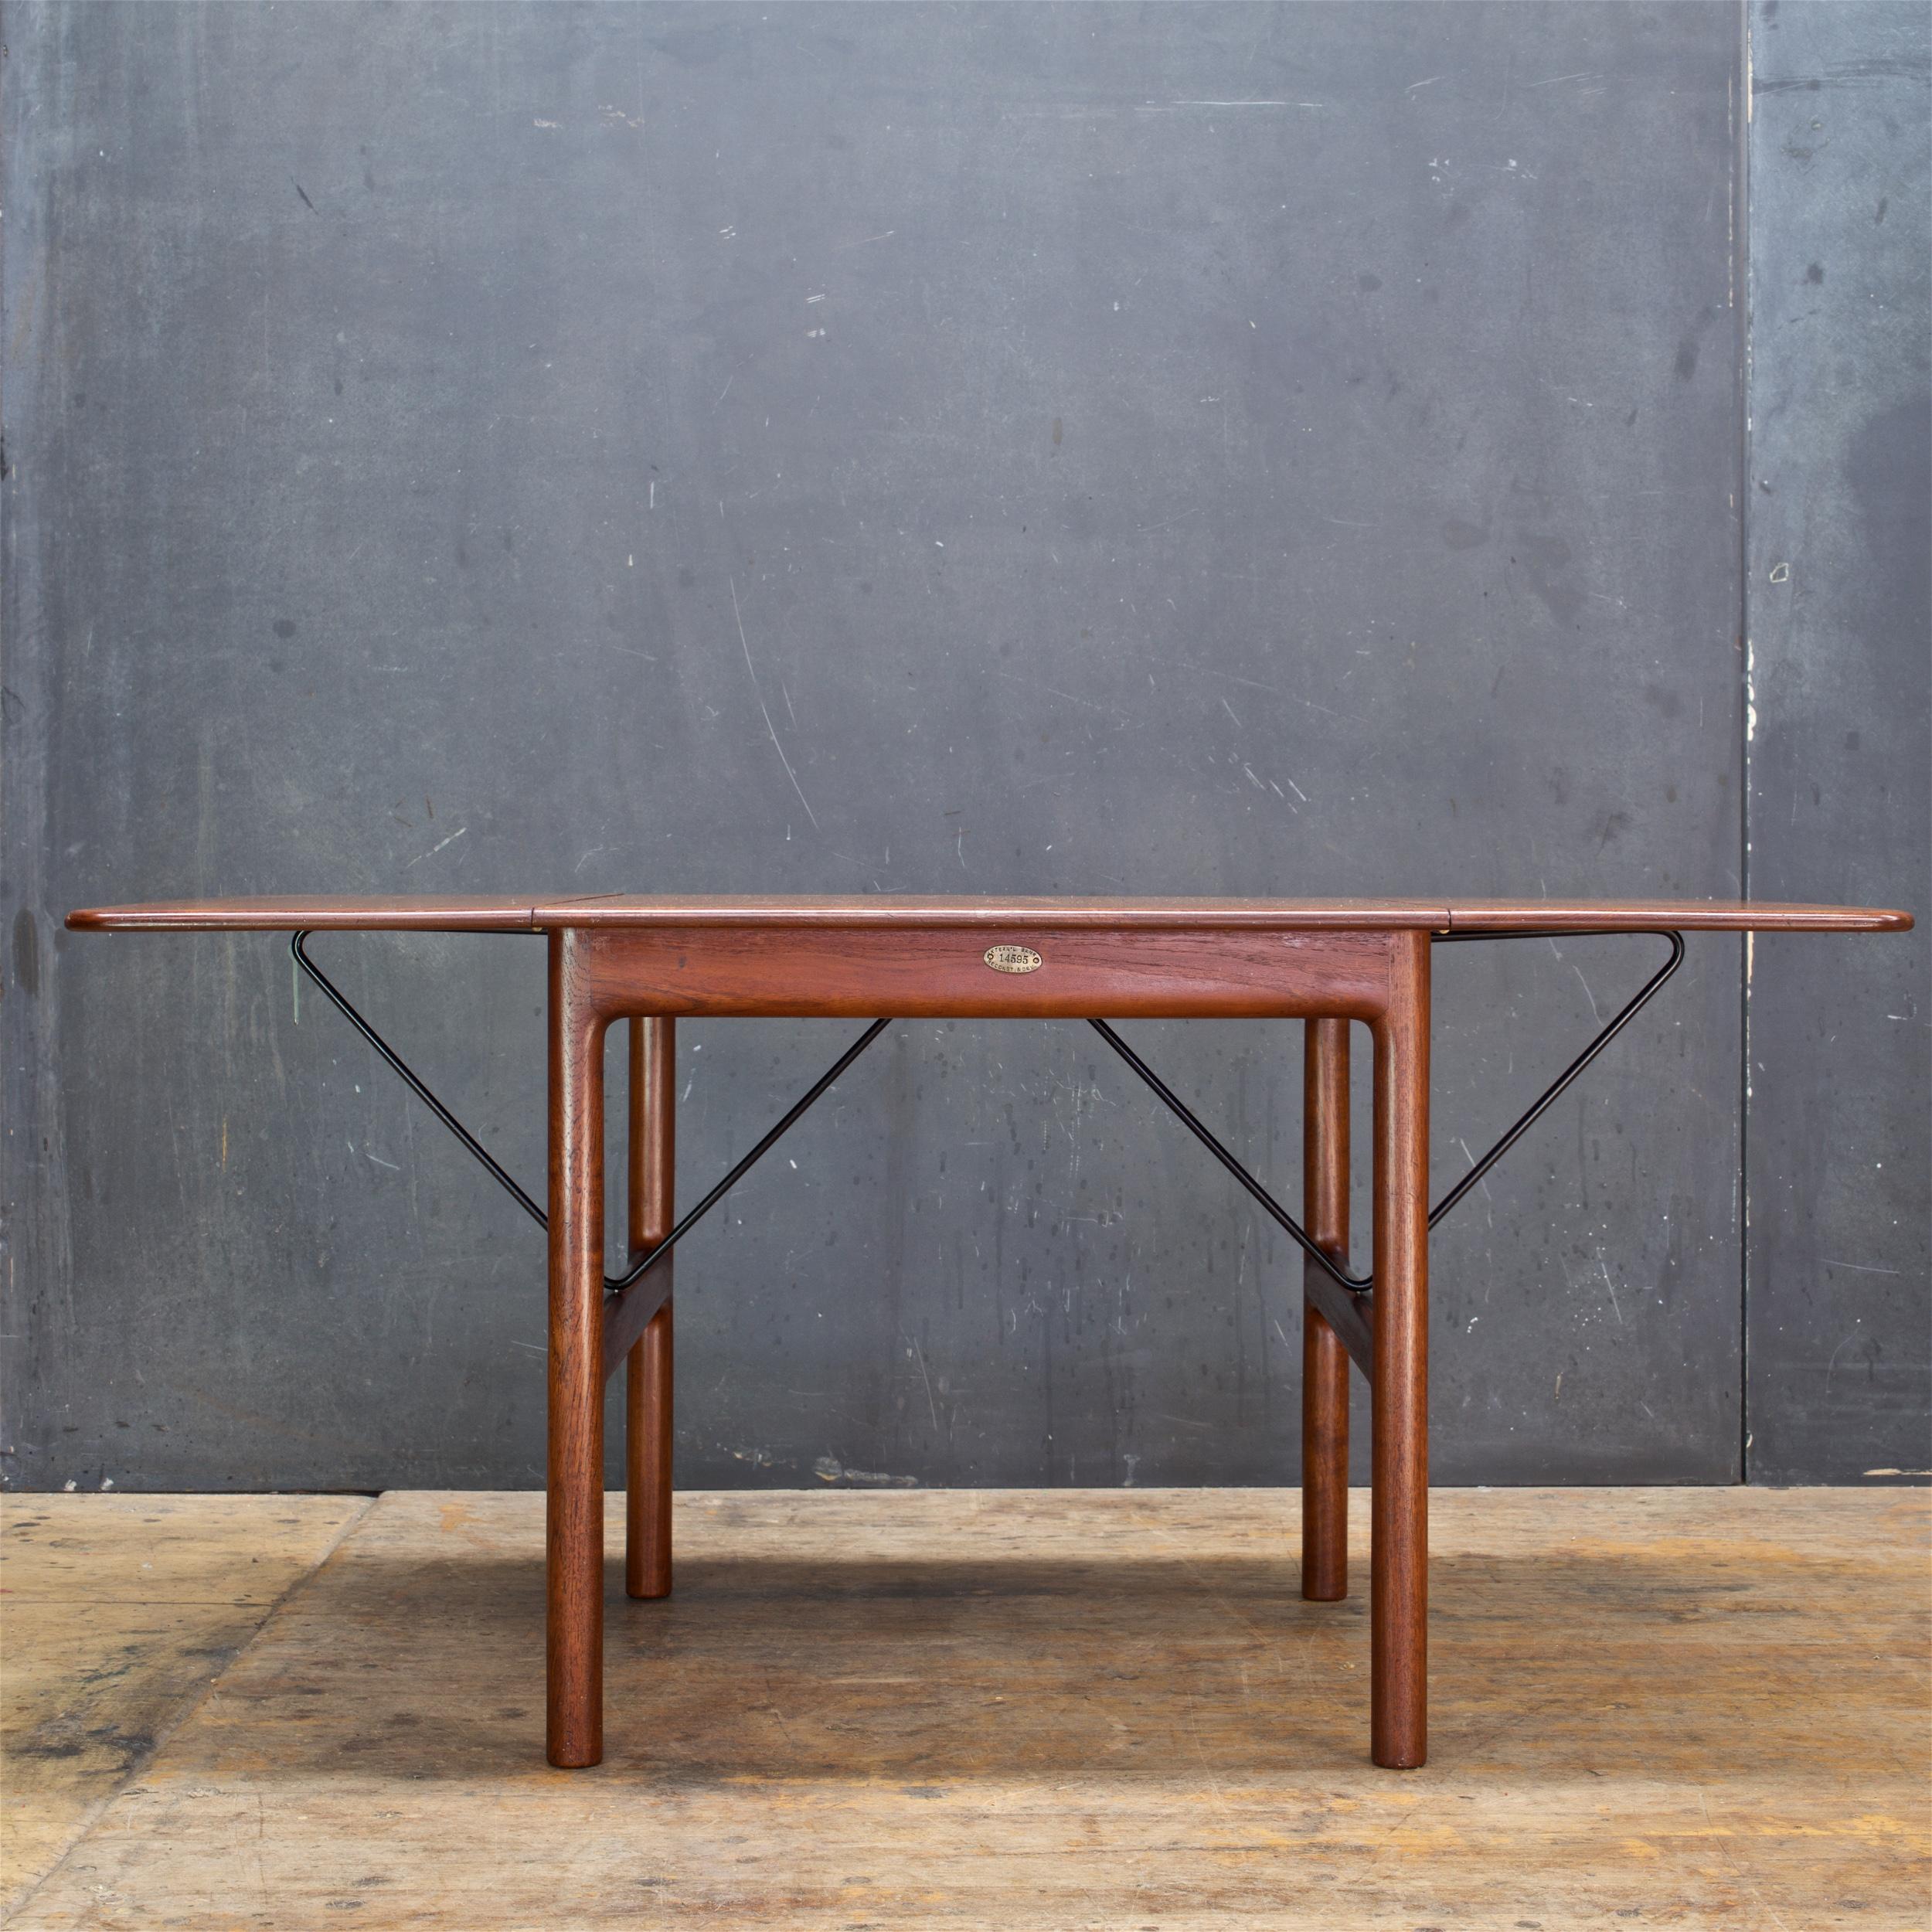 Rare table, with swiveling triangles for leaf supports. Designed by Madsen, Aksel Bender (1916-2000) & Larsen, Ejner( 1917-1987) for maker Willy Beck. Retains makers medallion on bottom, and The International Bank for Reconstruction and Development